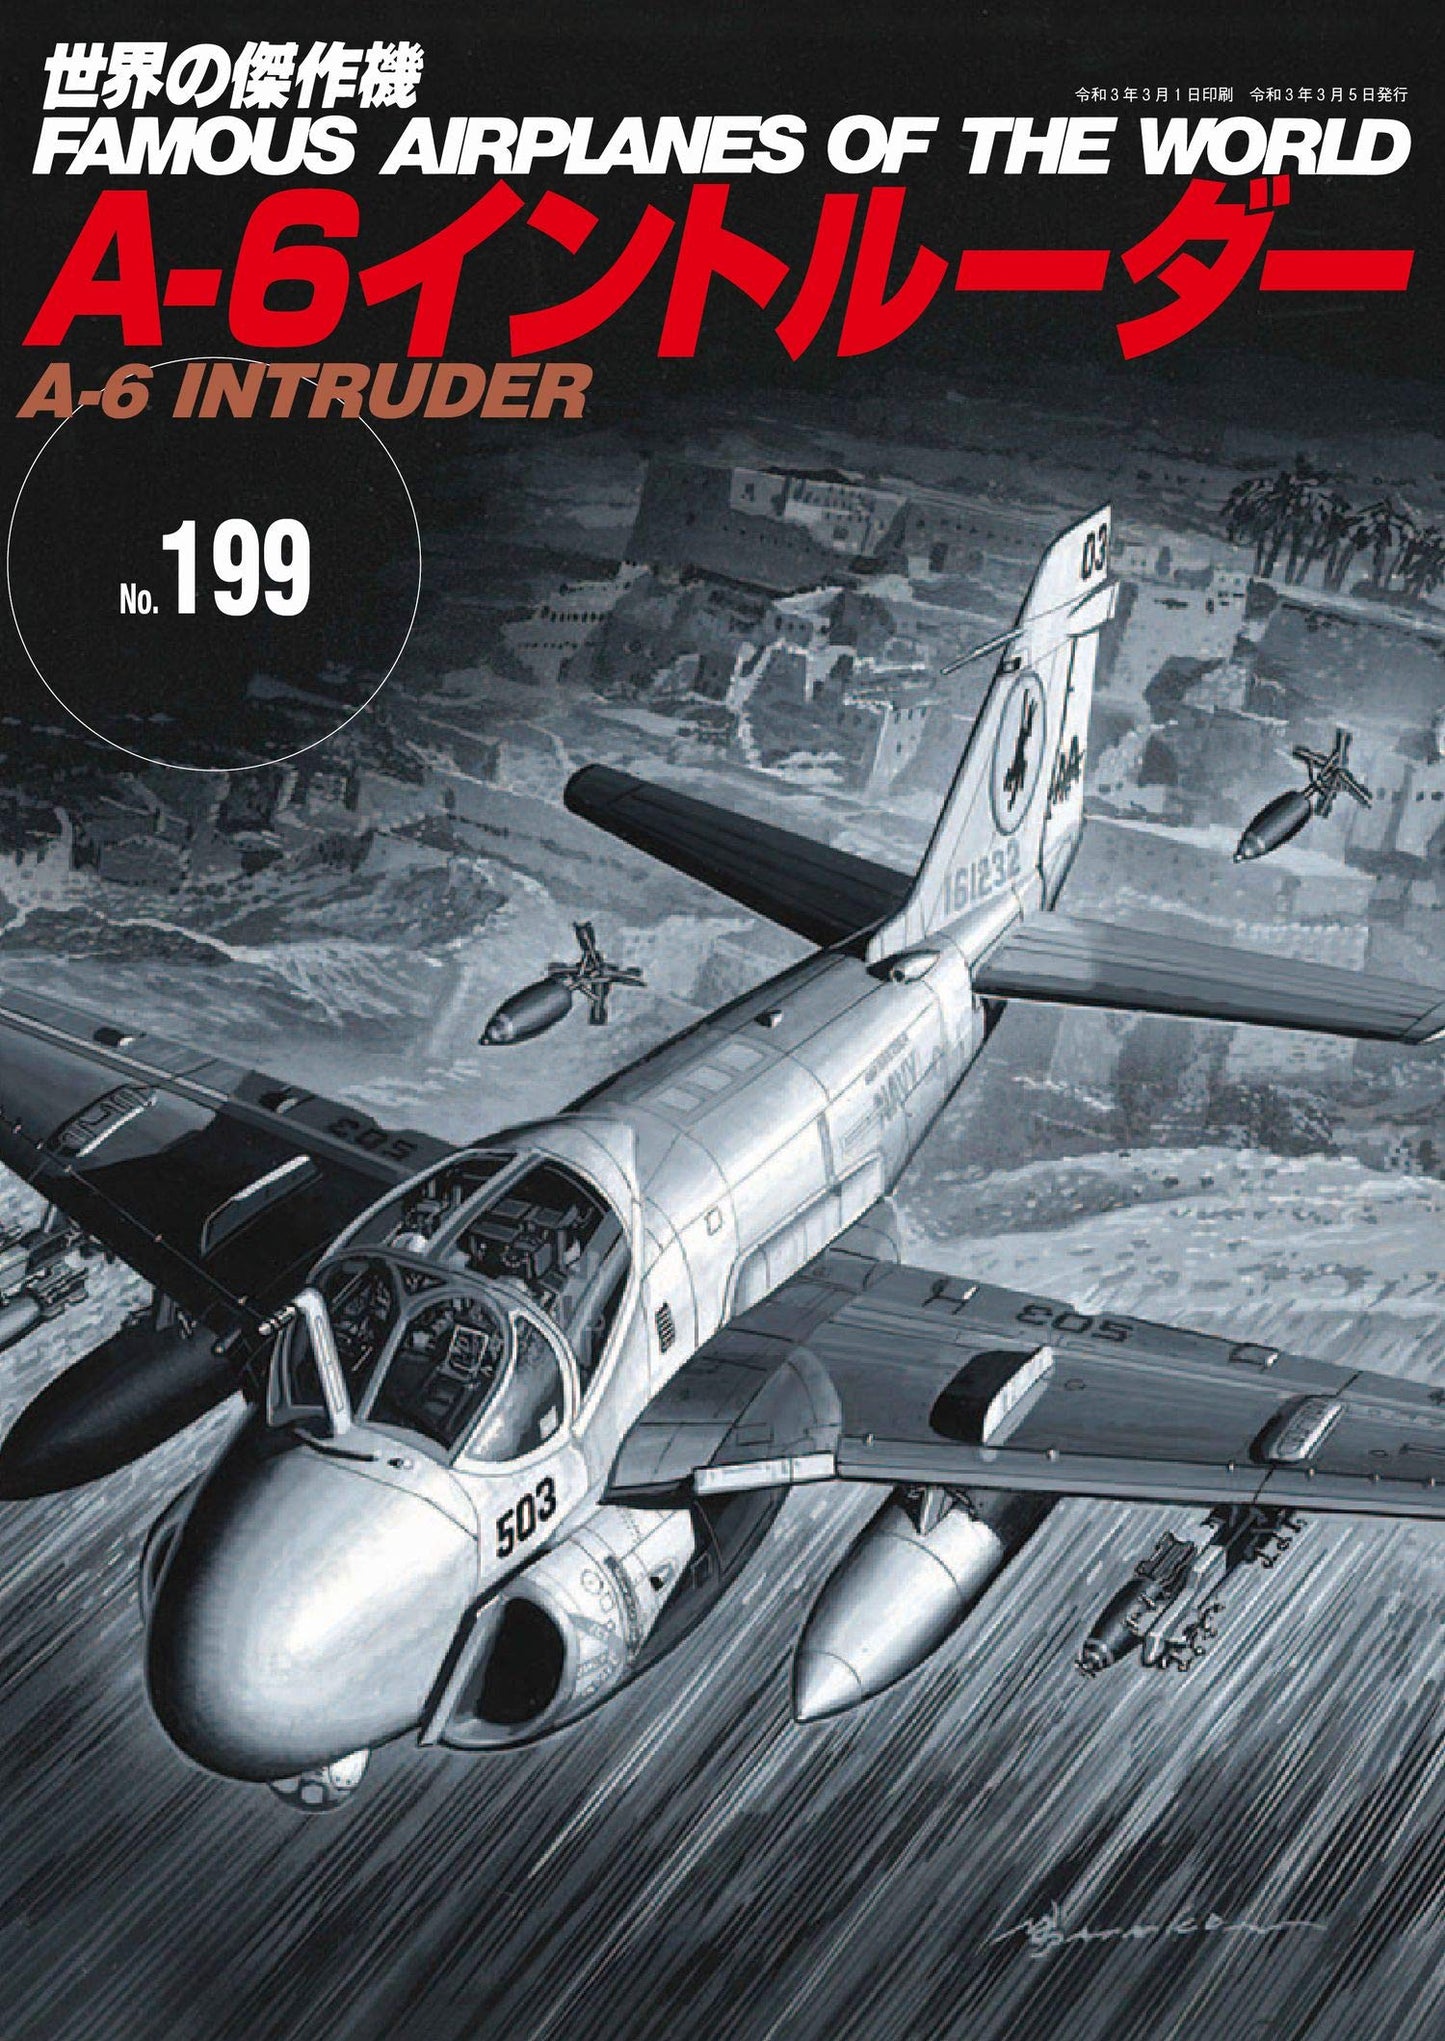 A-6 Intruder / Famous Airplanes of The World No.199